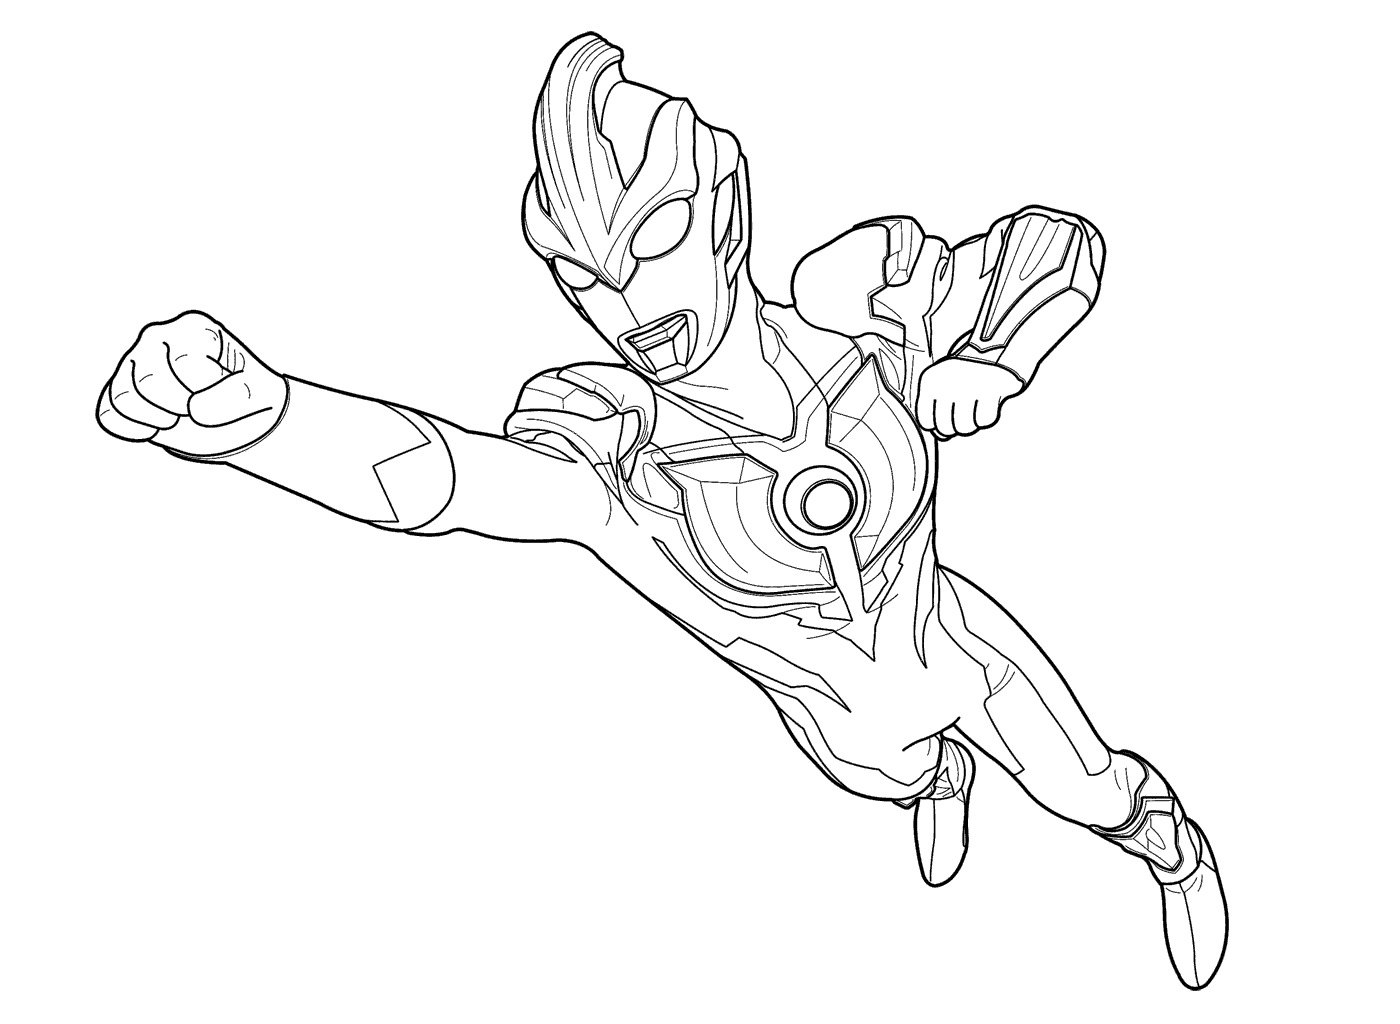 Ultraman Coloring Pages at GetColorings.com | Free printable colorings pages to print and color